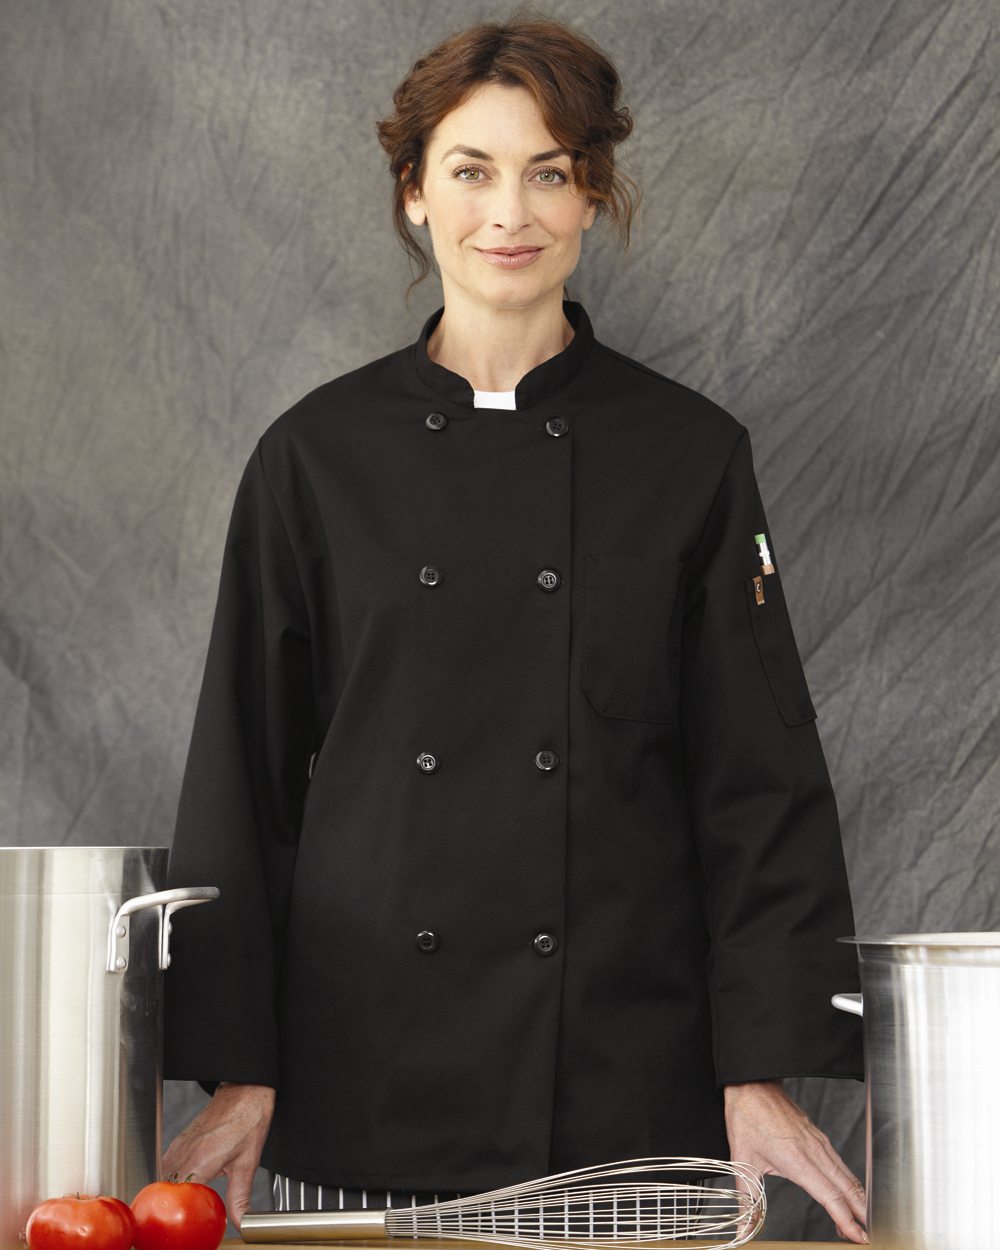 Chef Designs KT76 Black Traditional Chef Coat